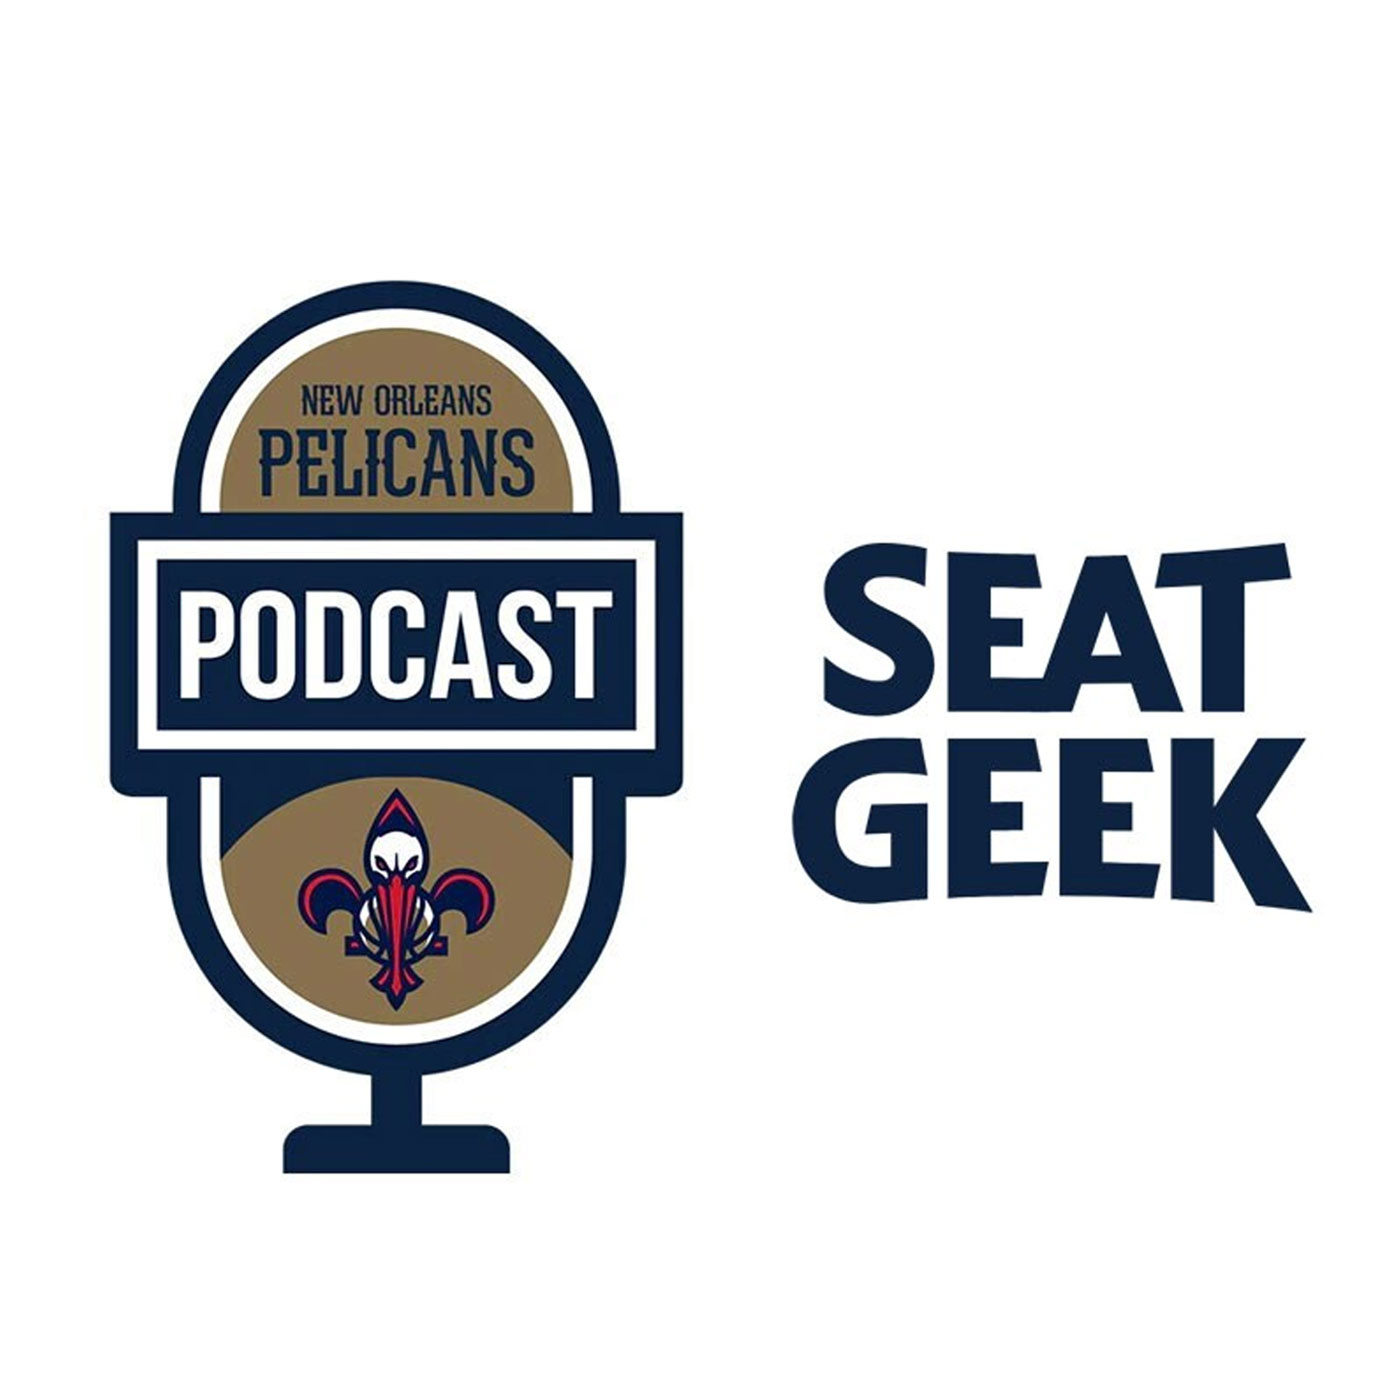 Tim Reynolds on the New Orleans Pelicans Podcast presented by SeatGeek - March 4, 2021